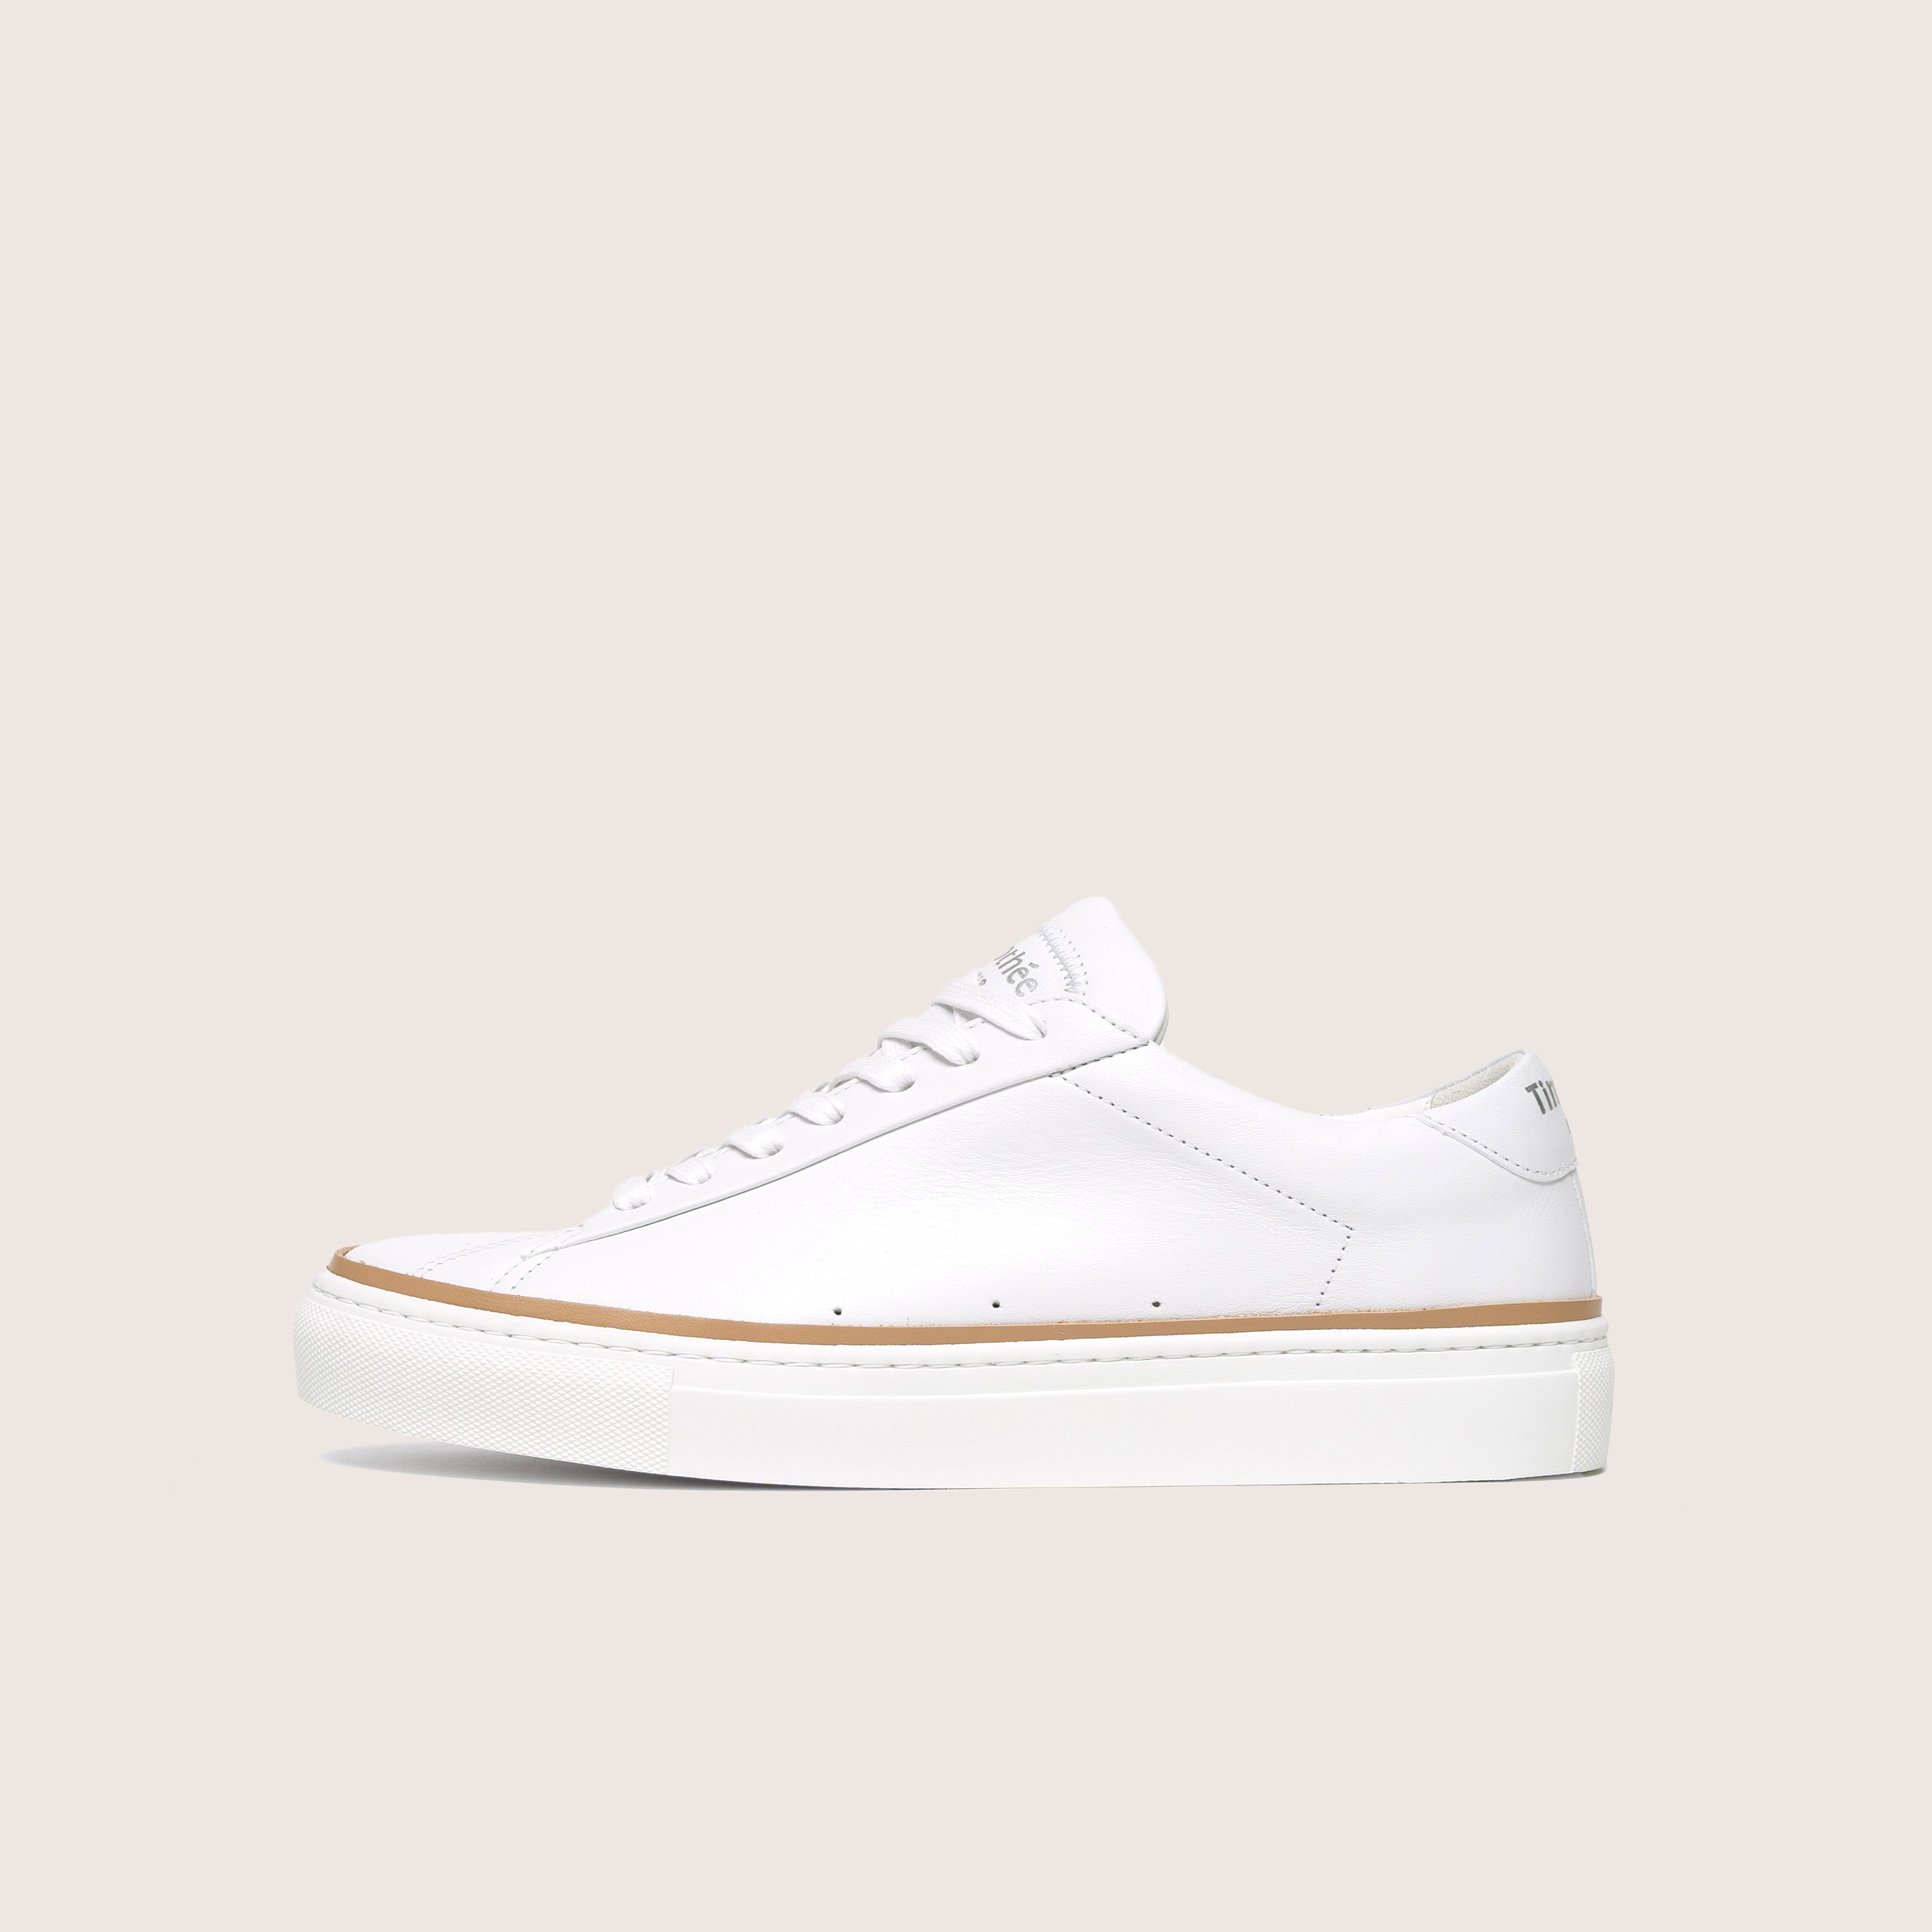 French handcrafted clean white sneaker Atlantique by timothee paris profile photo 